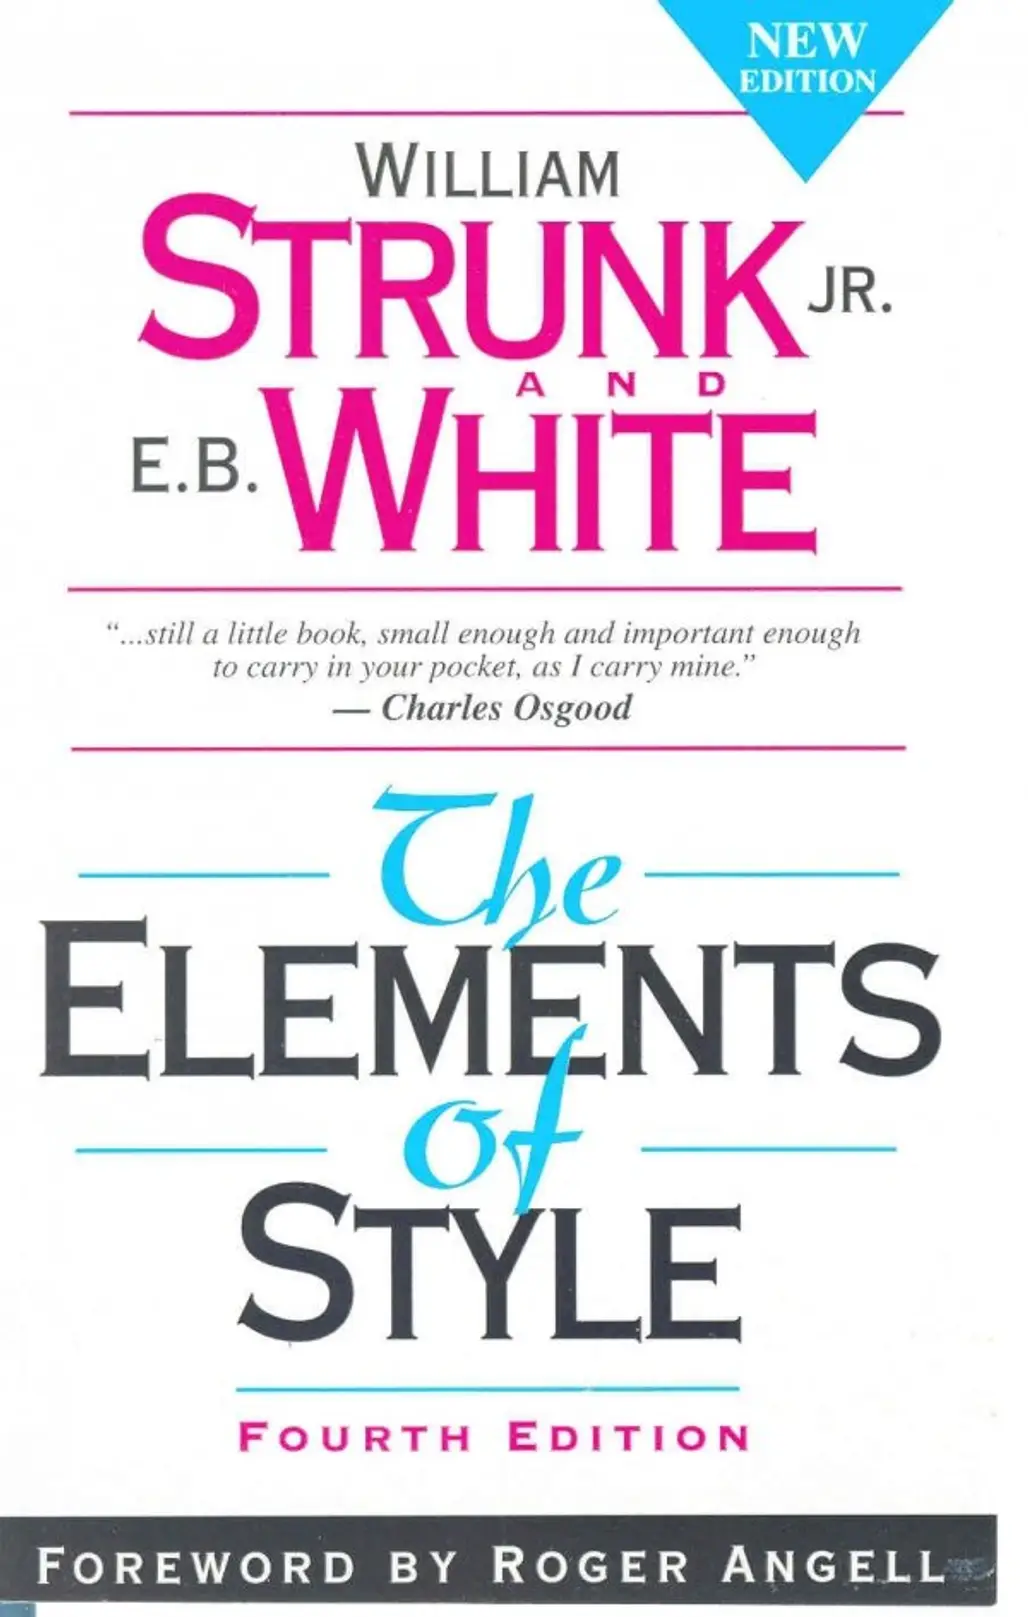 Elements of Style by Strunk & White